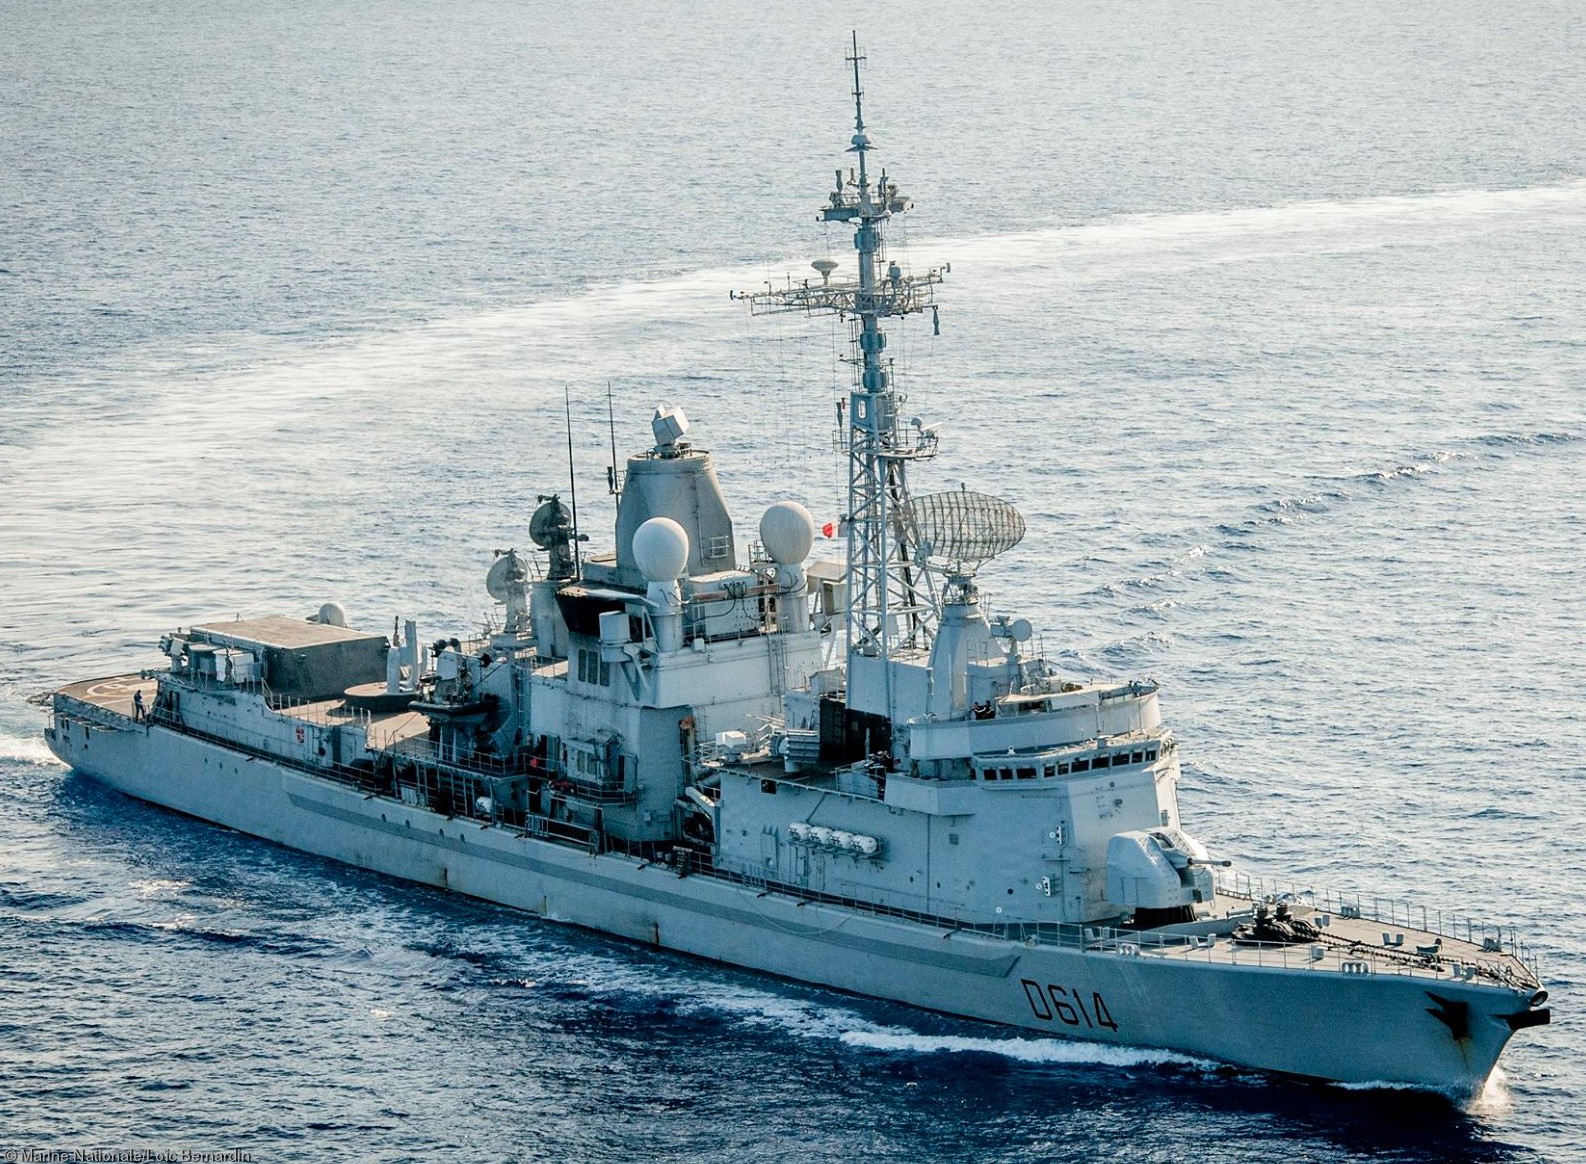 d-614 fs cassard f70aa class guided missile frigate ffgh ddg french navy marine nationale 19